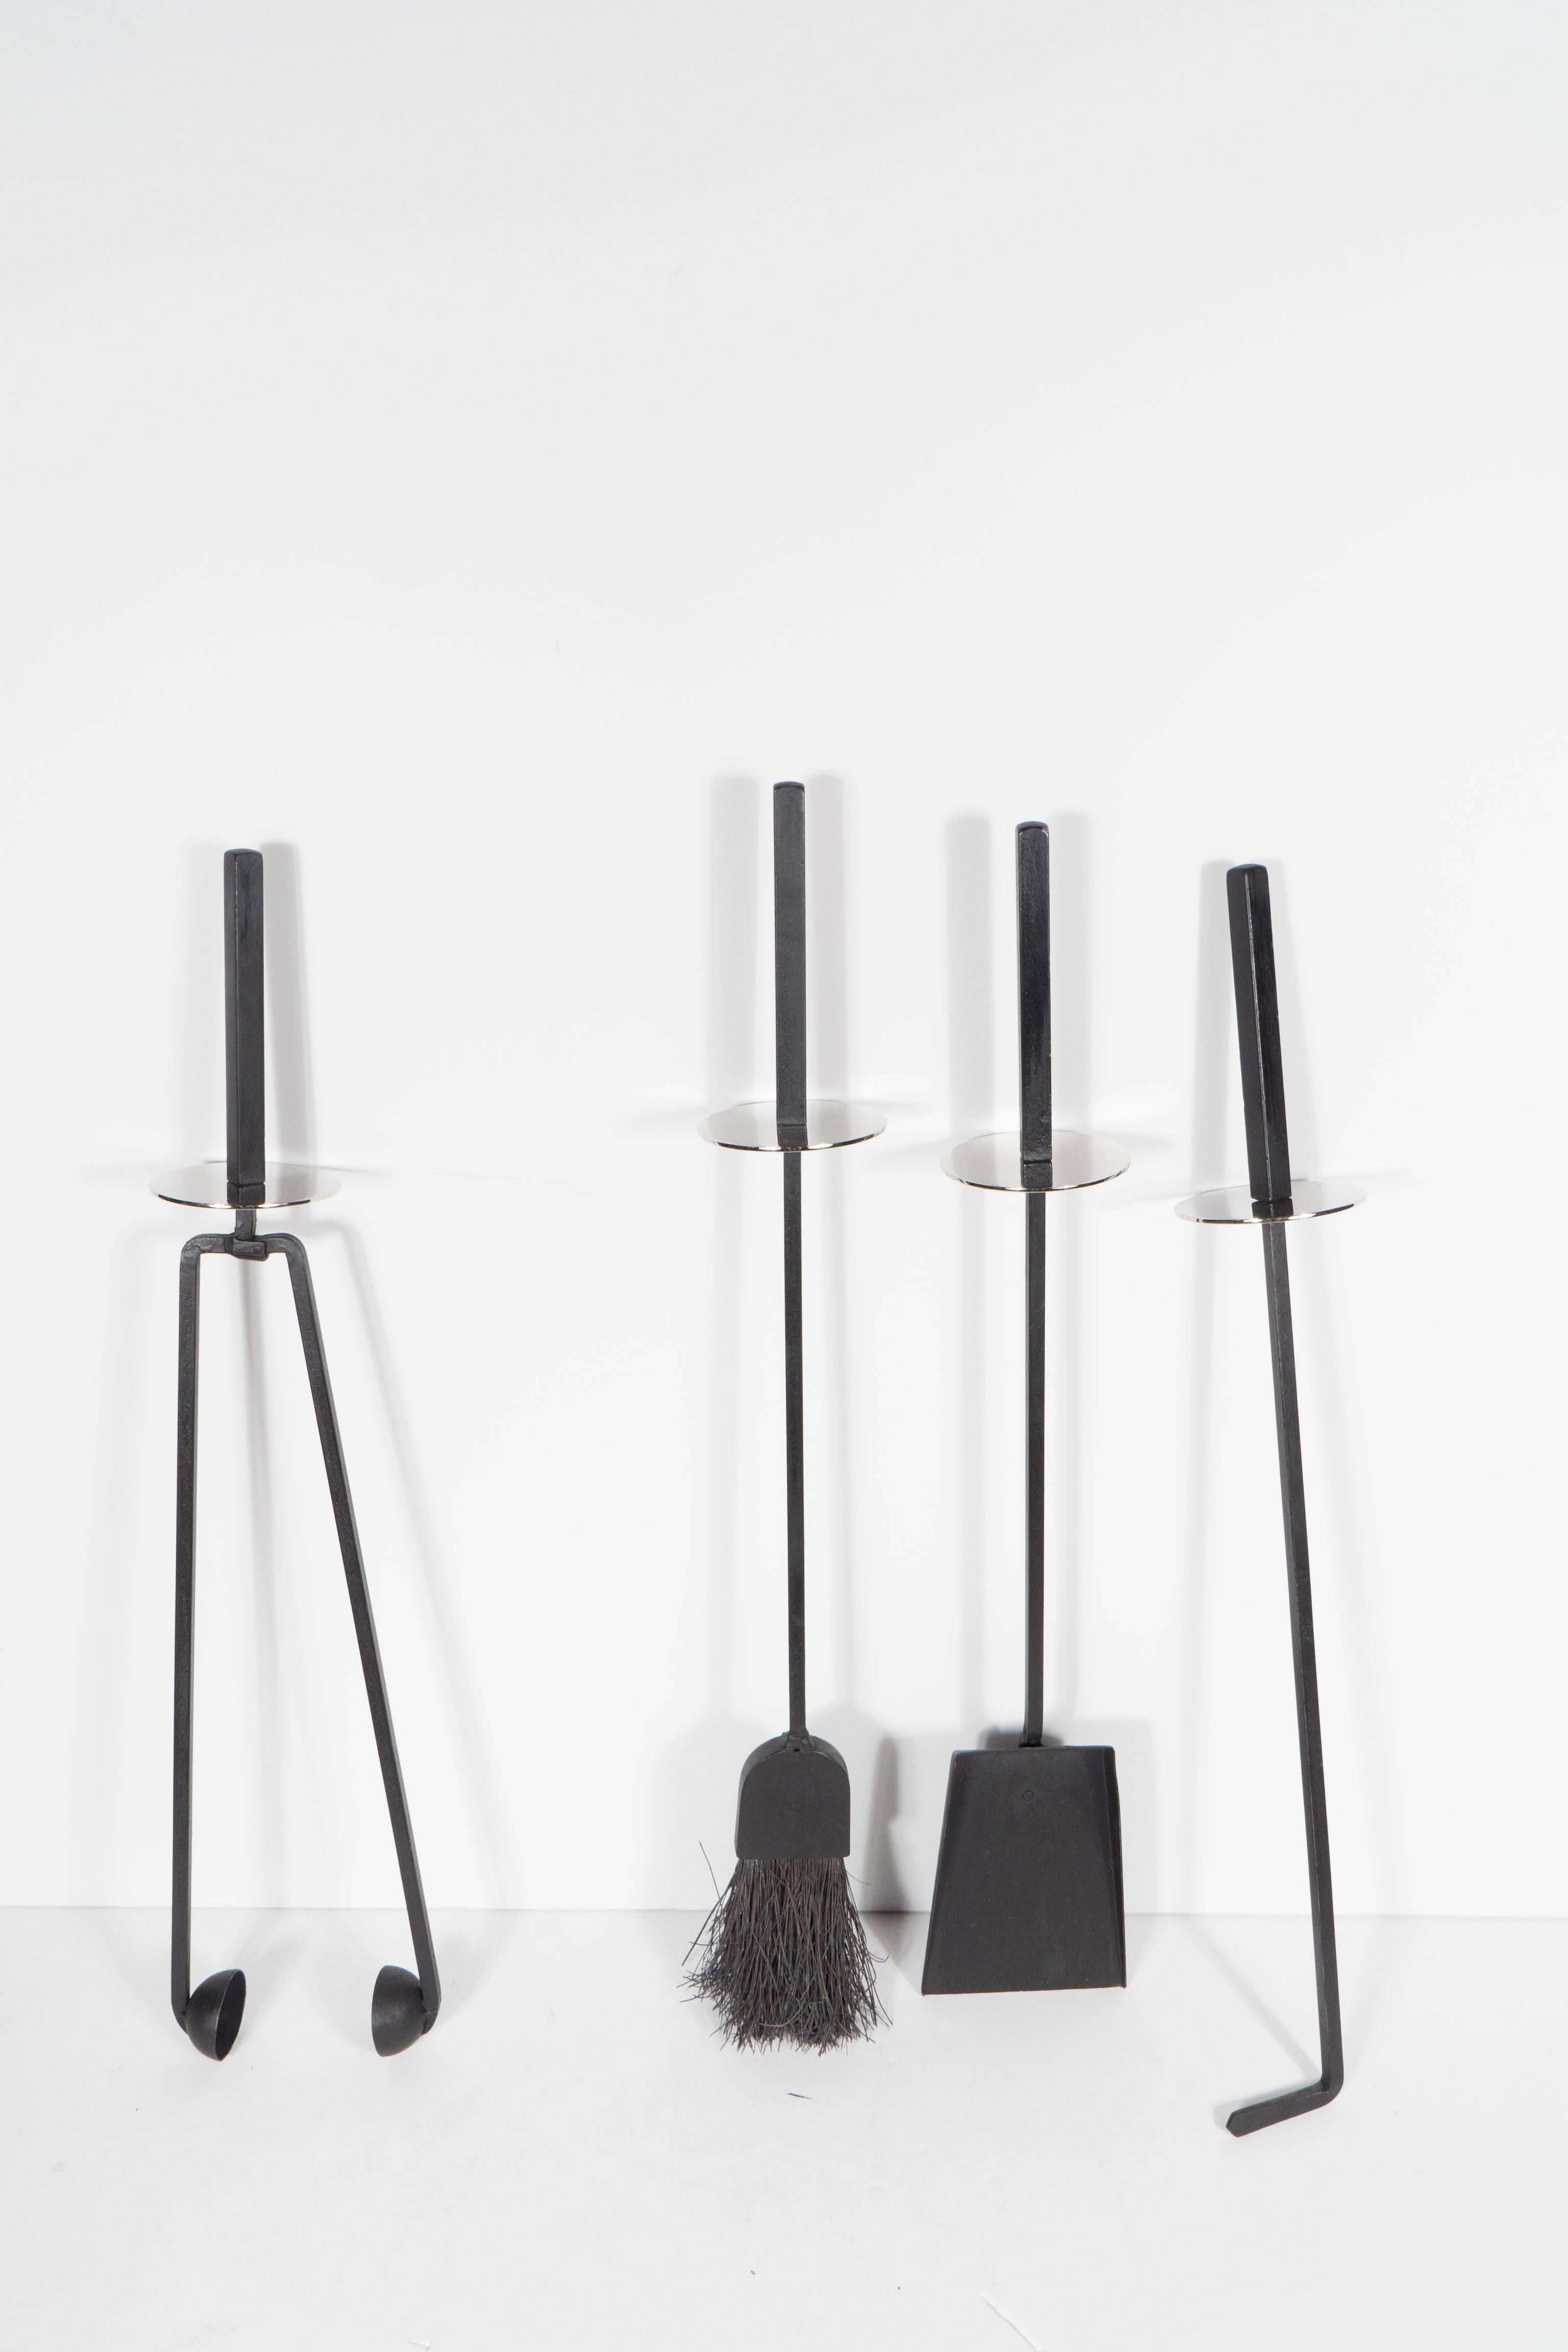 This very sophisticated firetool set features a matte black enamel finish. Designed by Mel Bogart by Stewart-Winthrop. The base is circular with a square column form stem supporting four fire tools consisting of a poker, log holder, broom and shovel